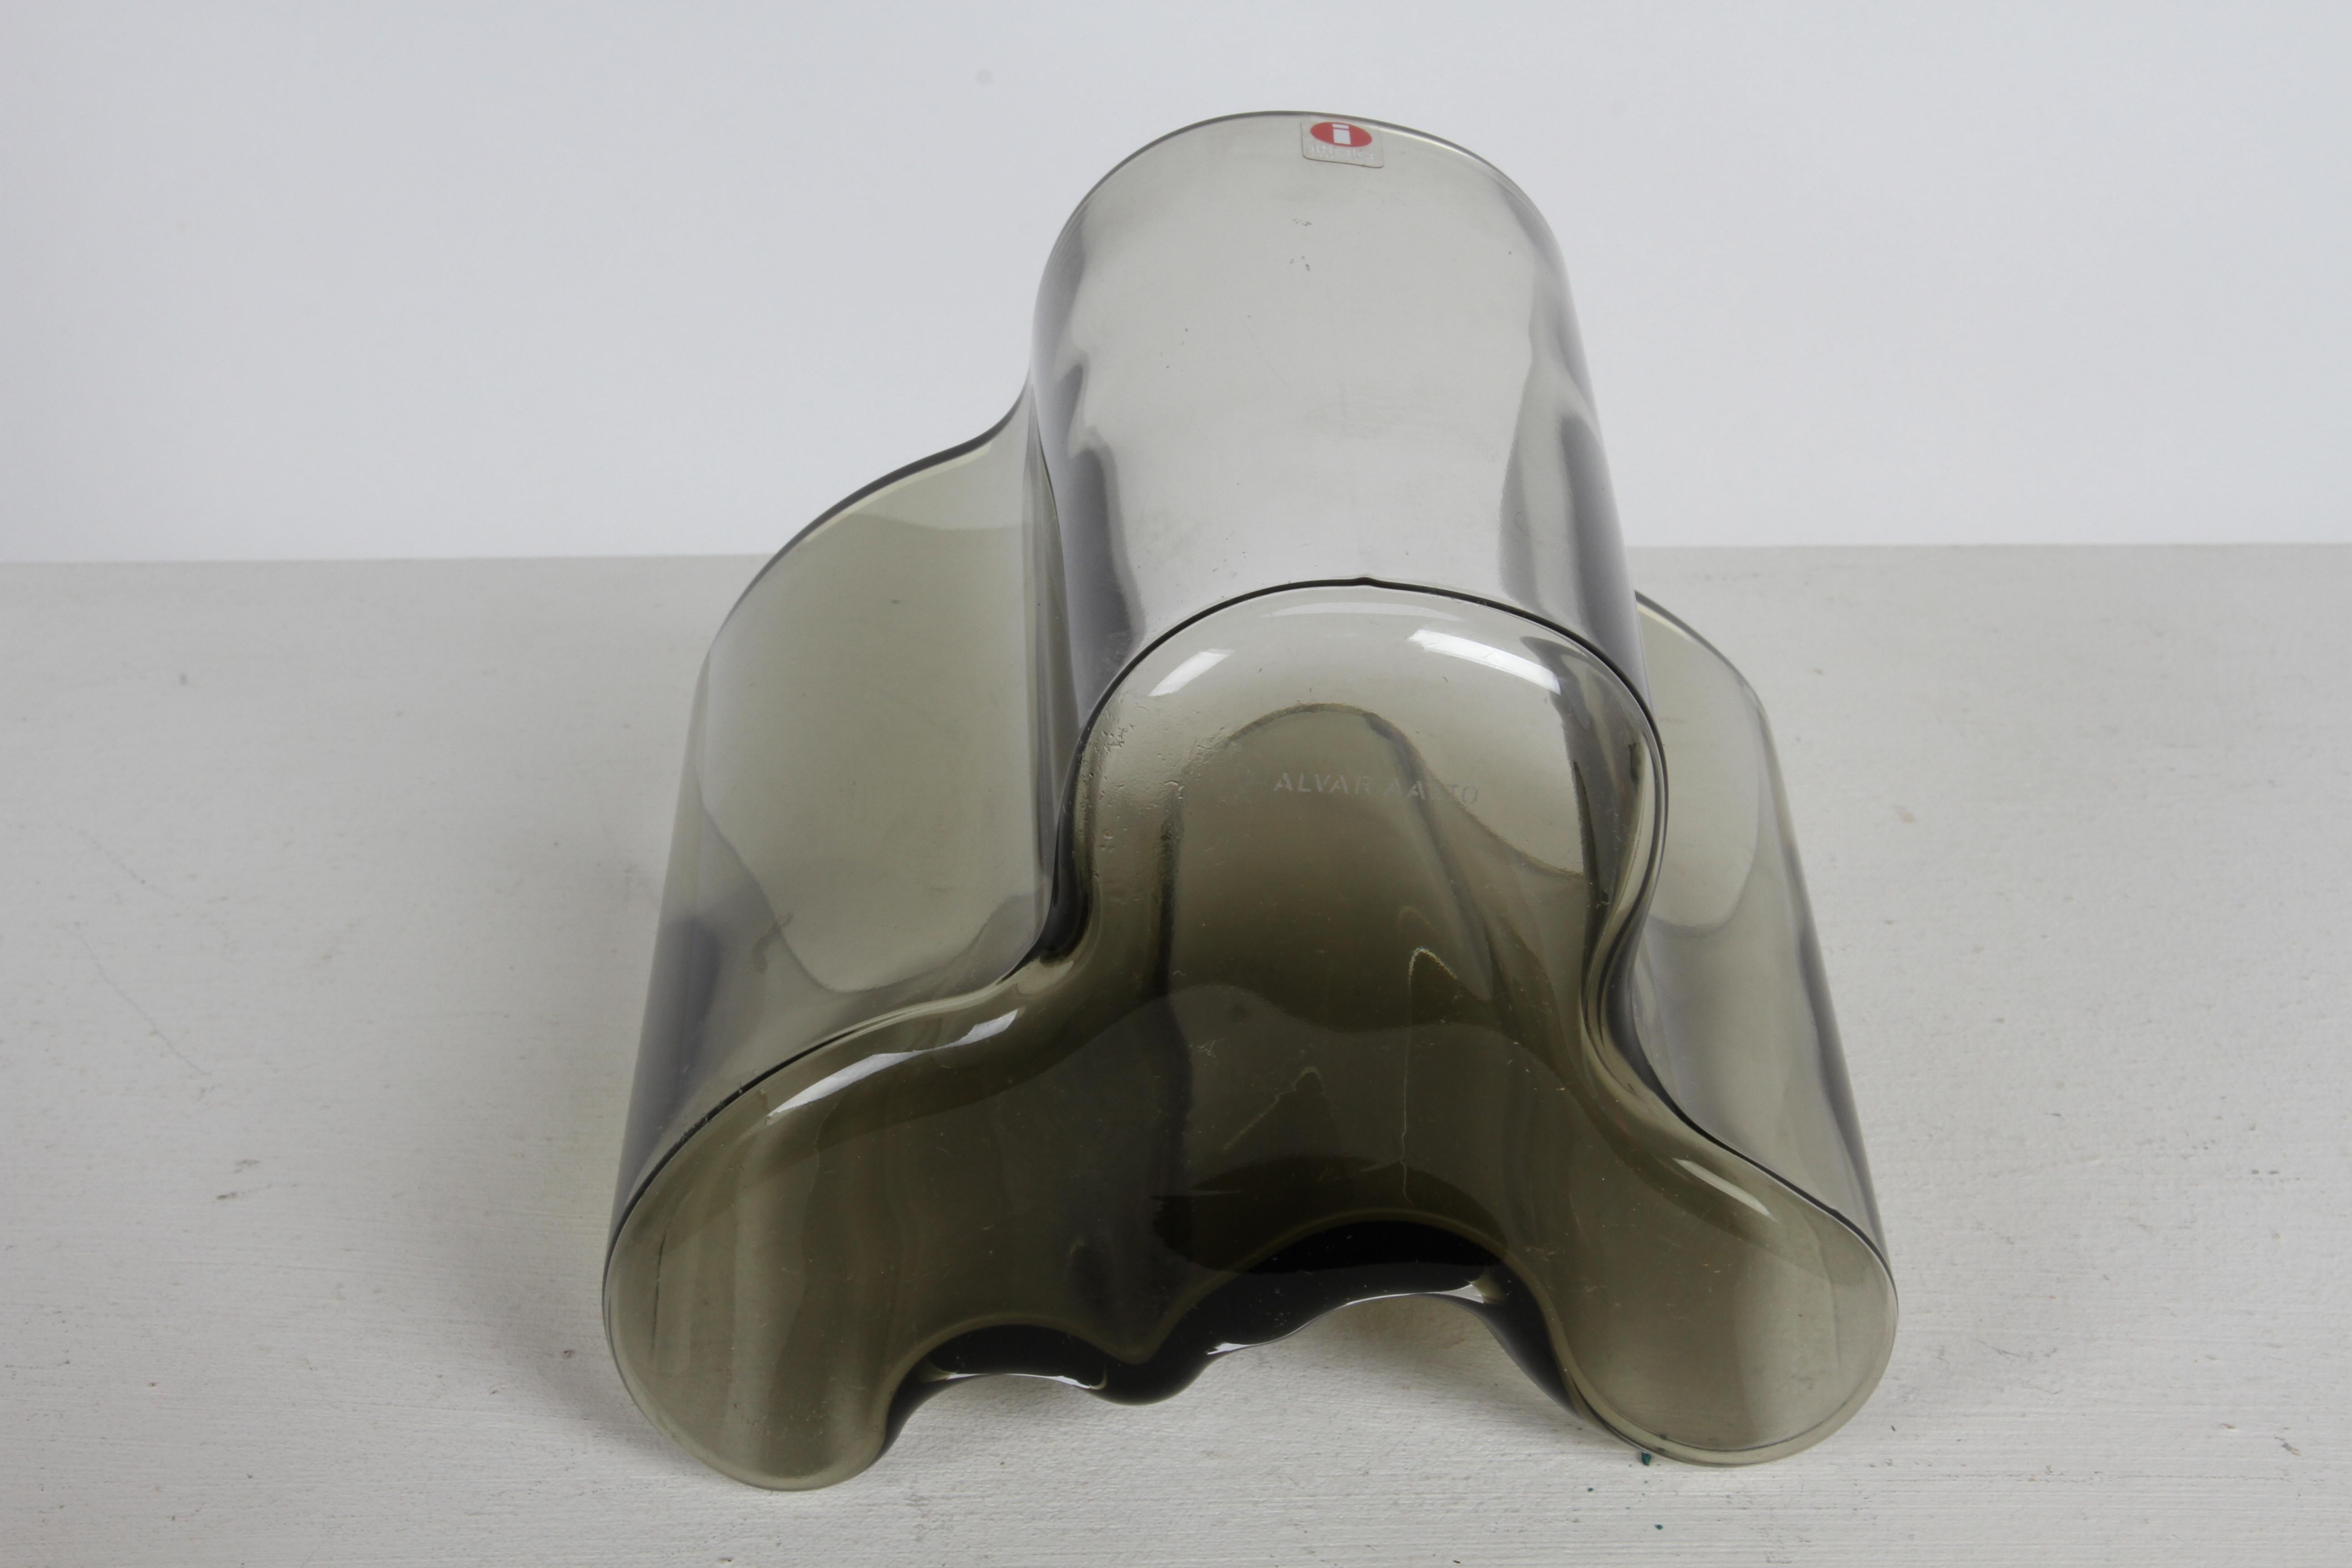 1970s MCM Alvar Aalto Savoy Vase 3030 in Smoke Gray Glass by Iittala Finland For Sale 8